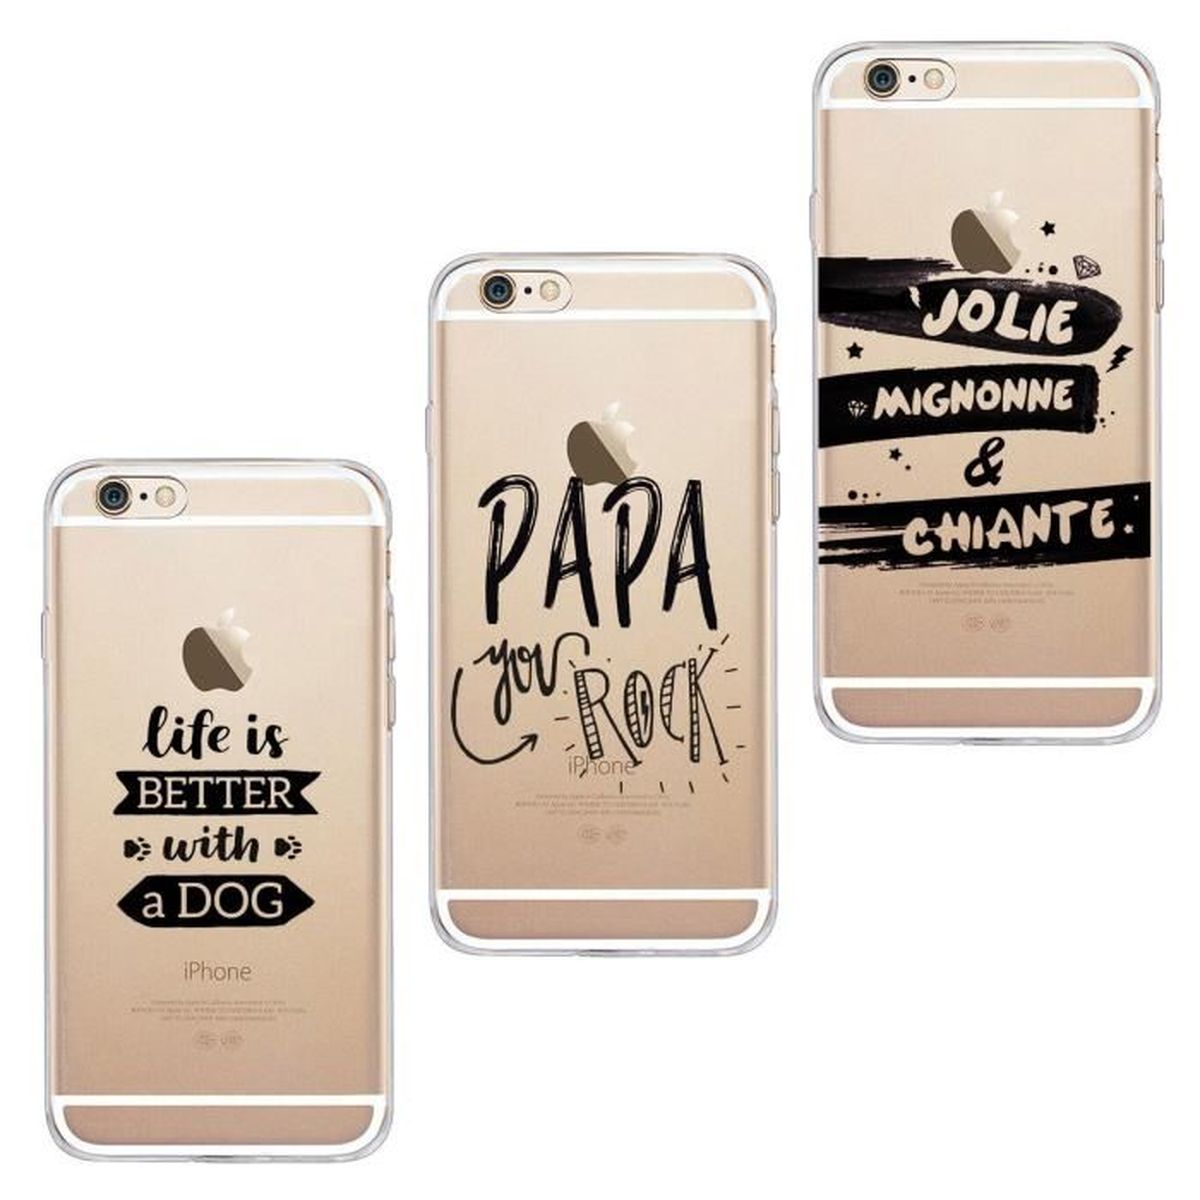 3x coques iphone 6